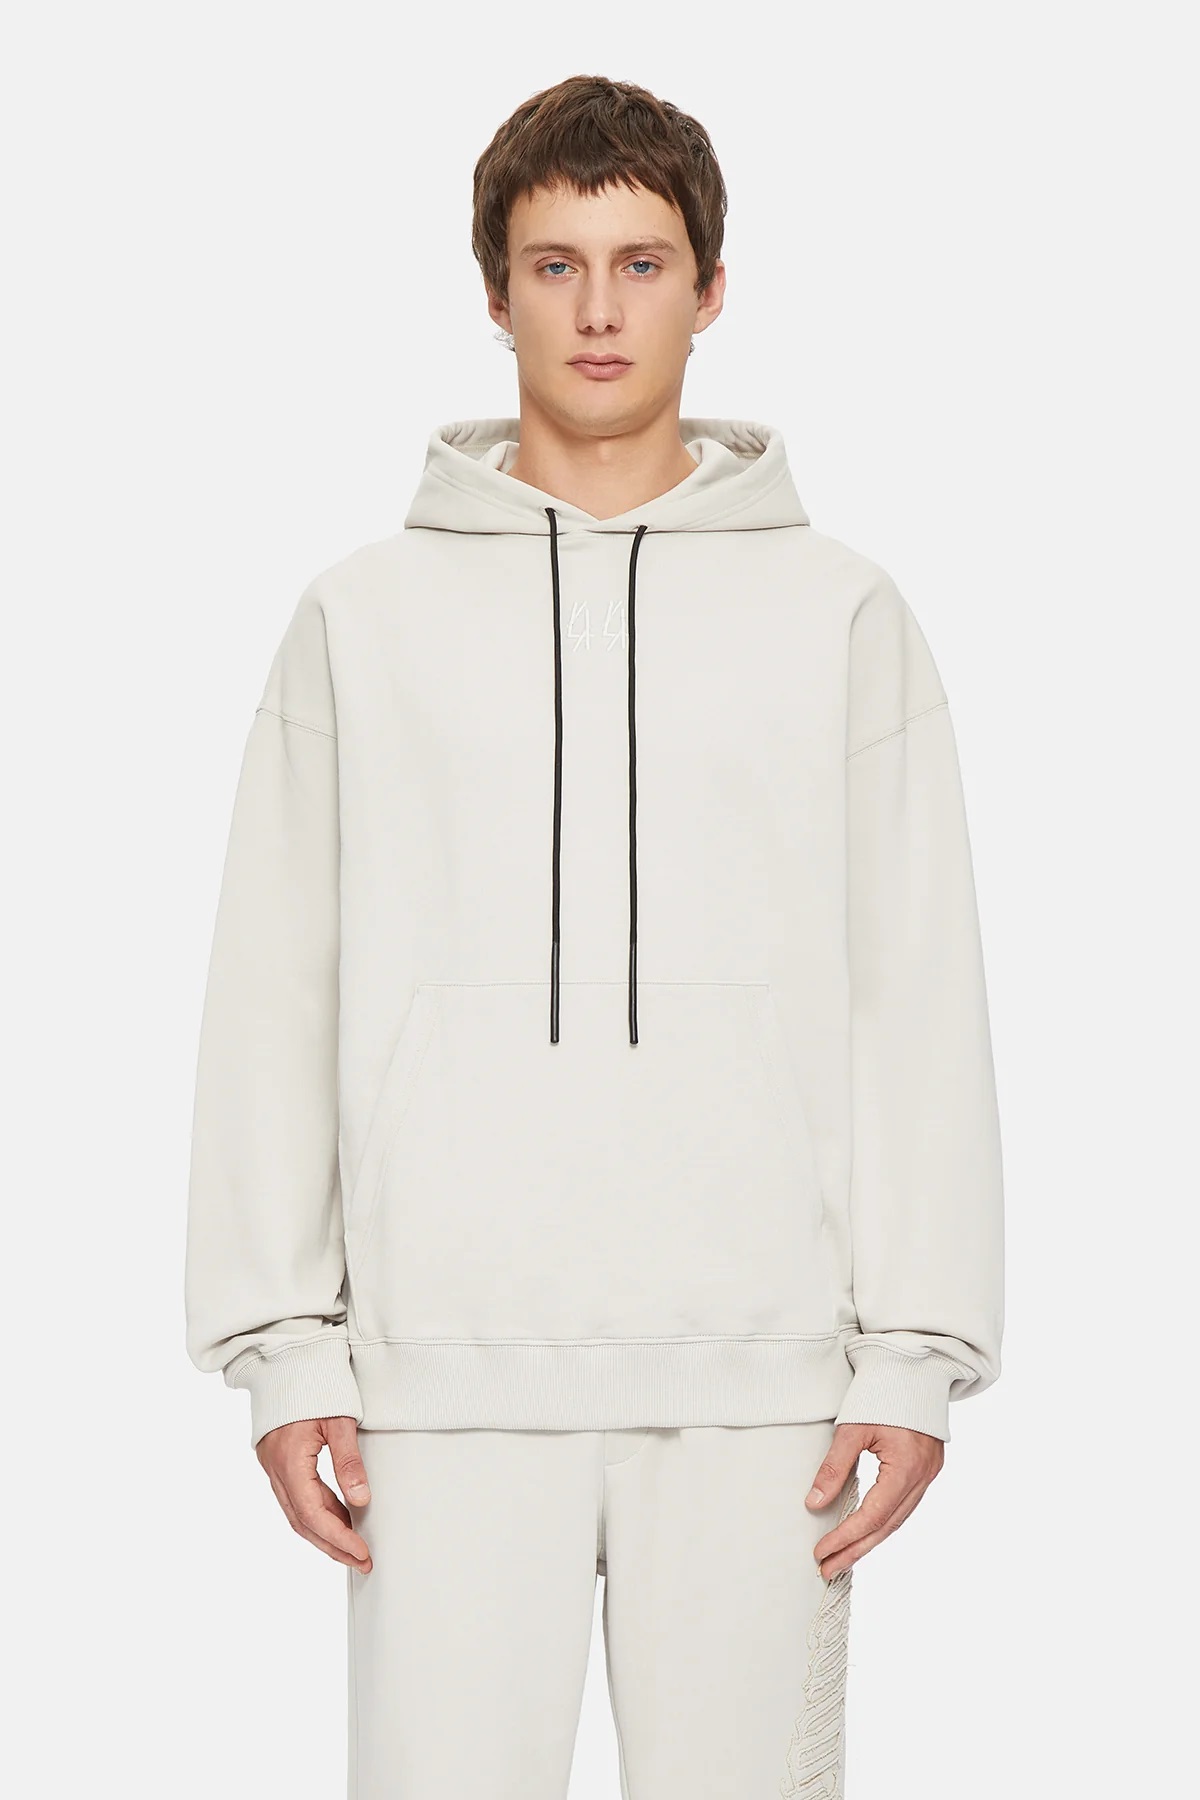 44 LABEL GROUP New Classic Hoodie in Dirty White/Black L